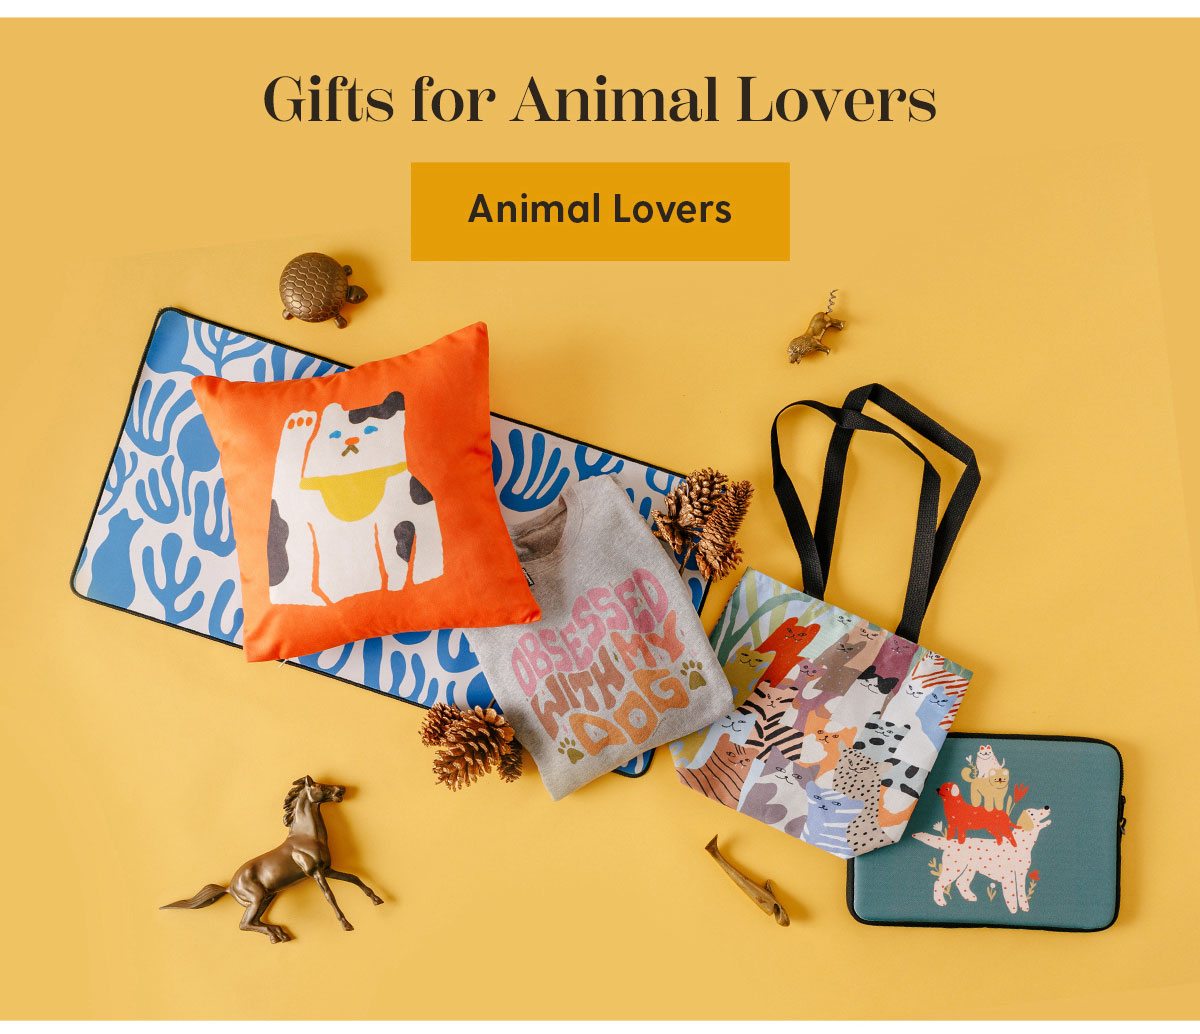 Gifts for Animal Lovers | Animal Lovers